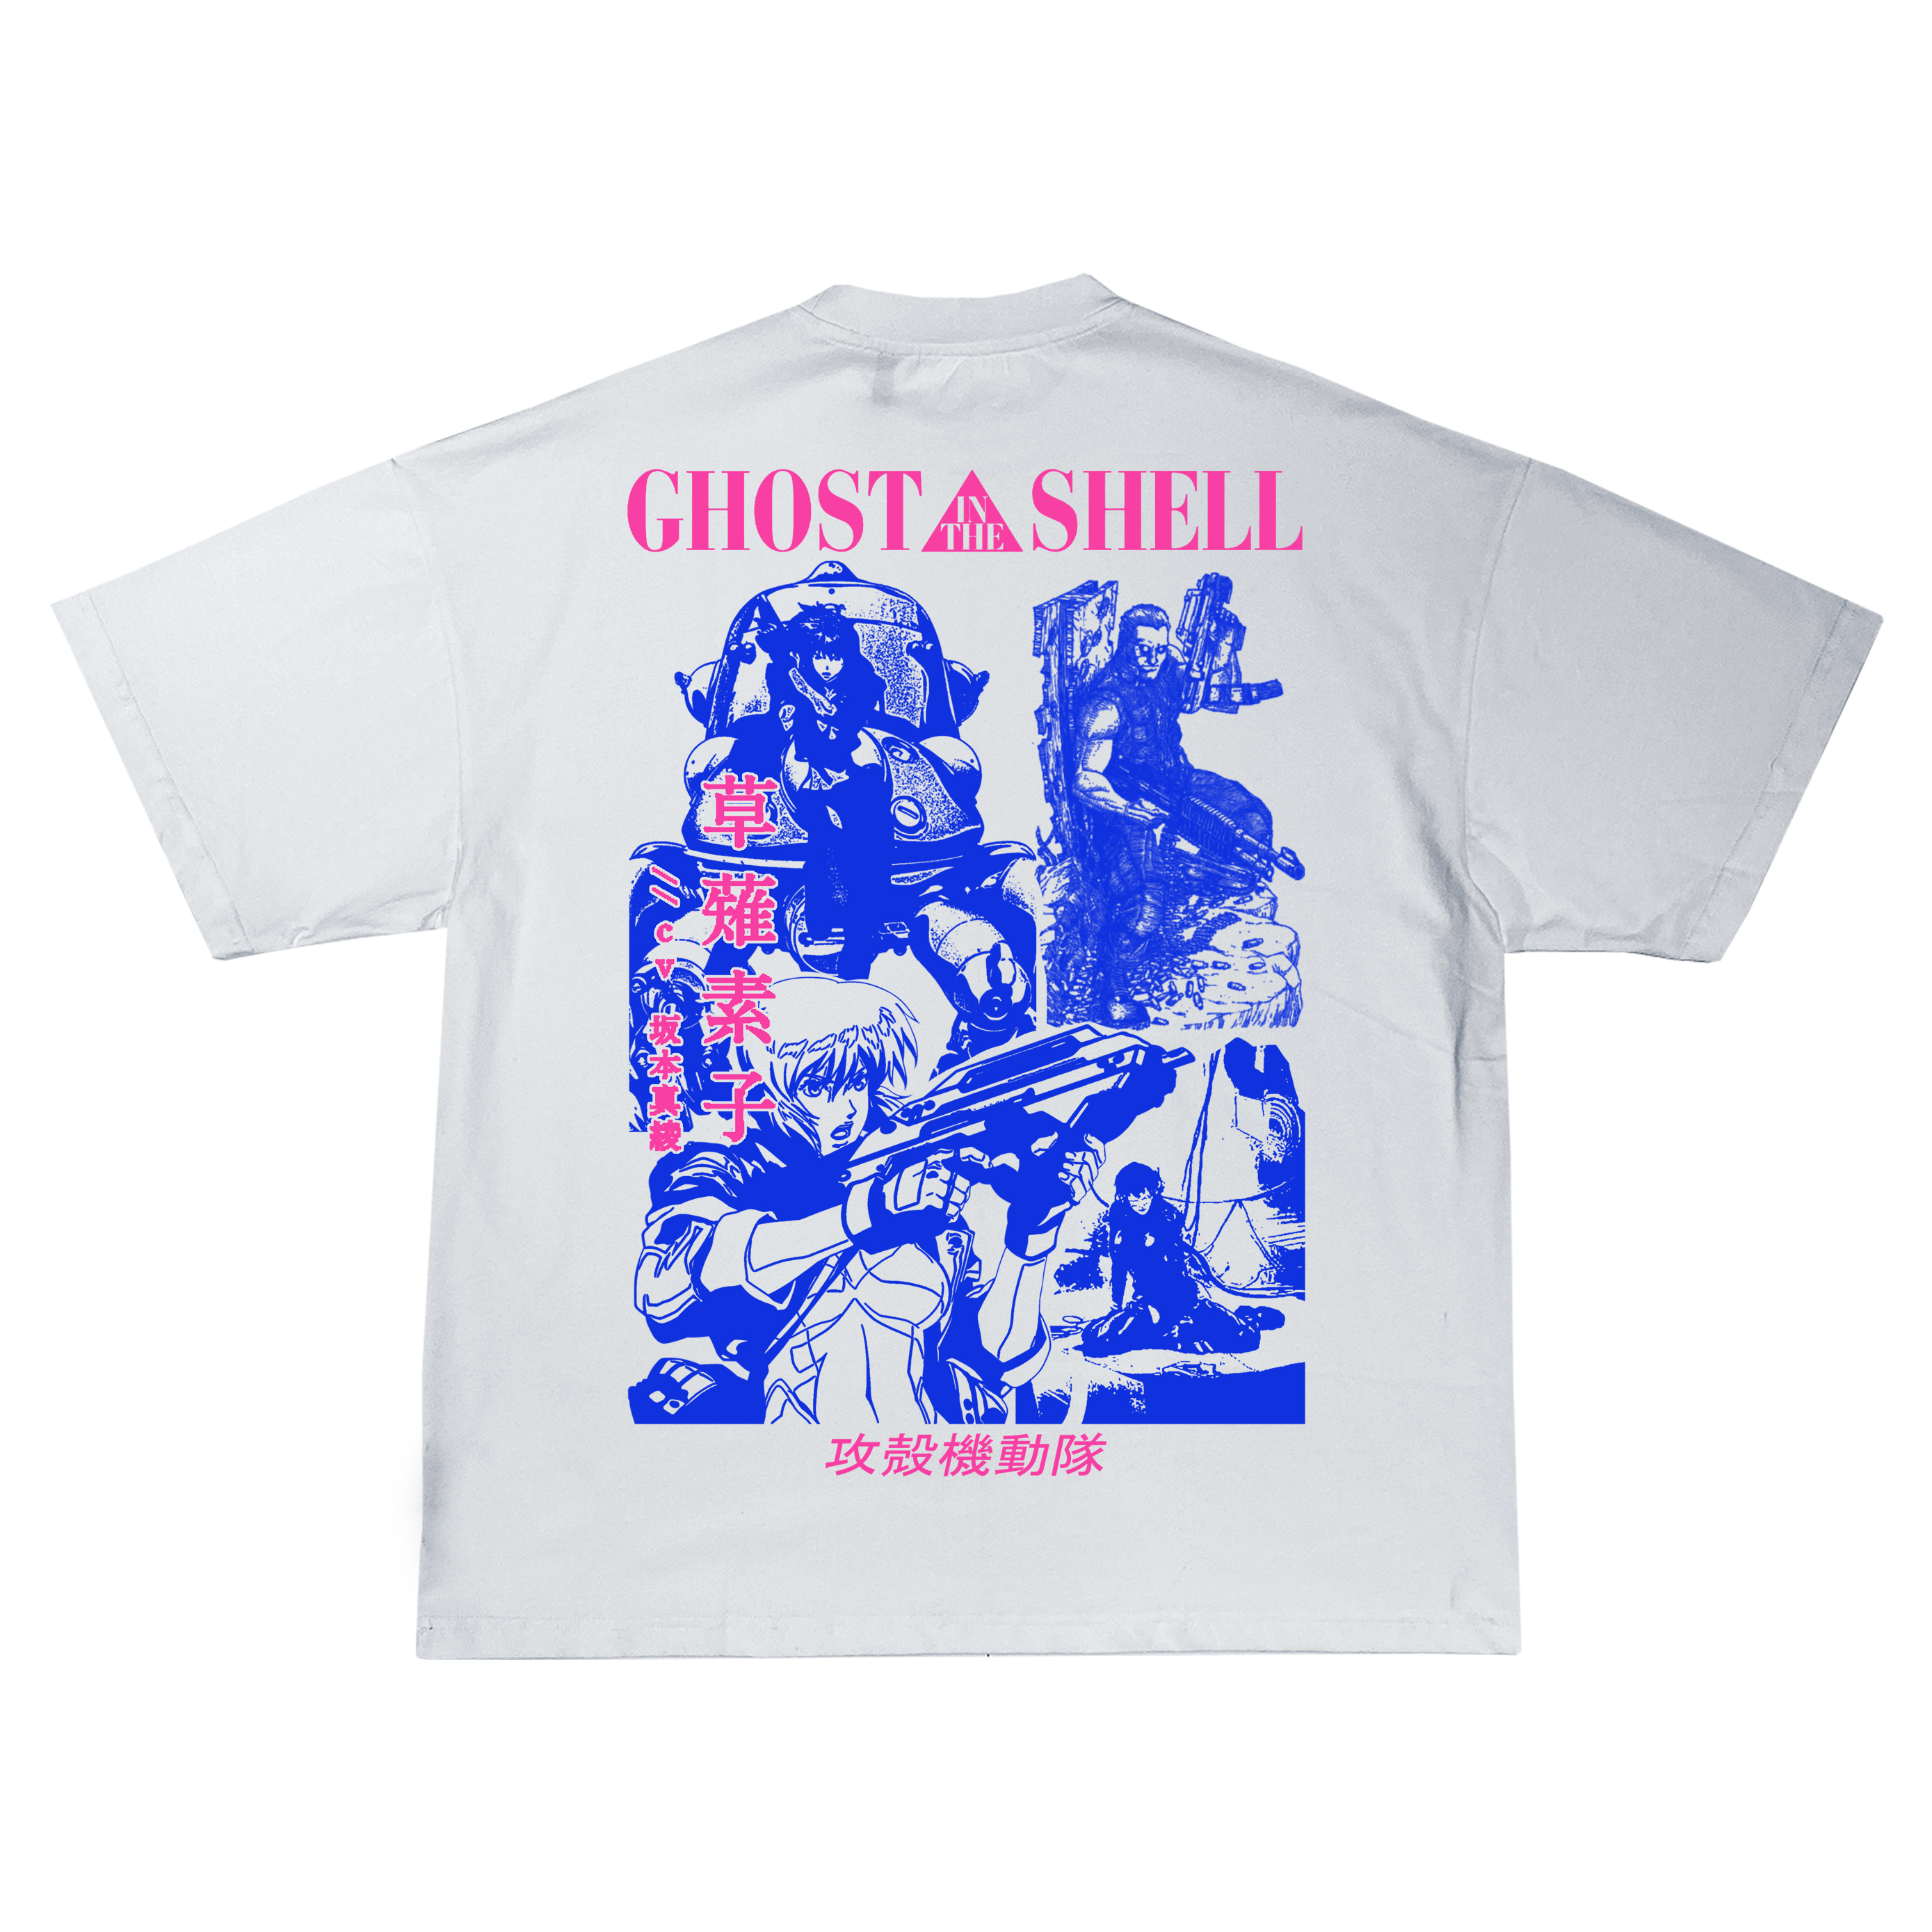  Ghost In the Shell Old School Anime | T-shirt